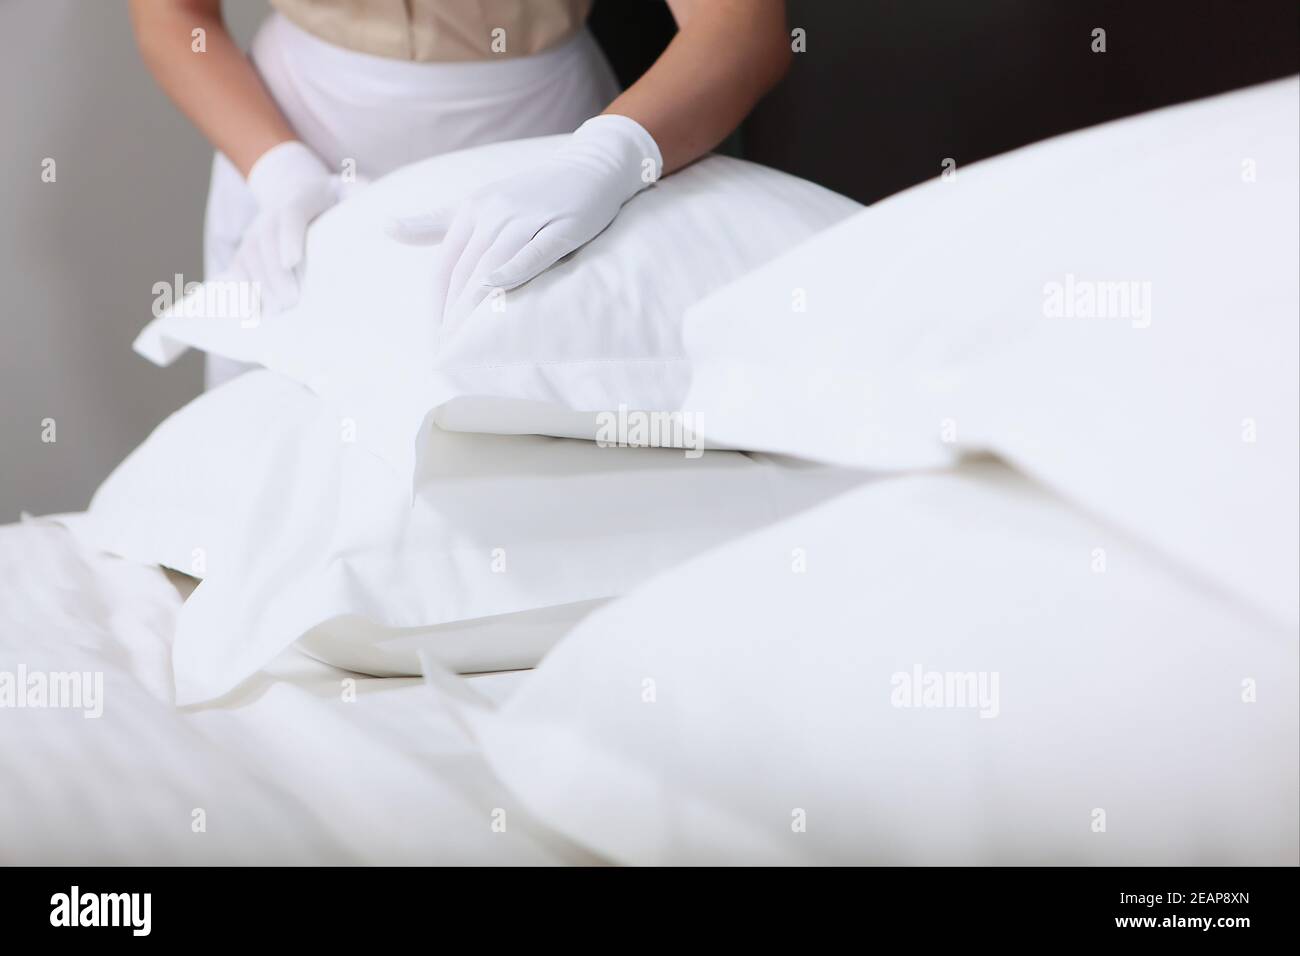 The maid changes the bed linen. Pillows are out of focus. Unrecognizable person. Hands in white cotton gloves. The concept of quality service in the hotel. Hotel business. Stock Photo